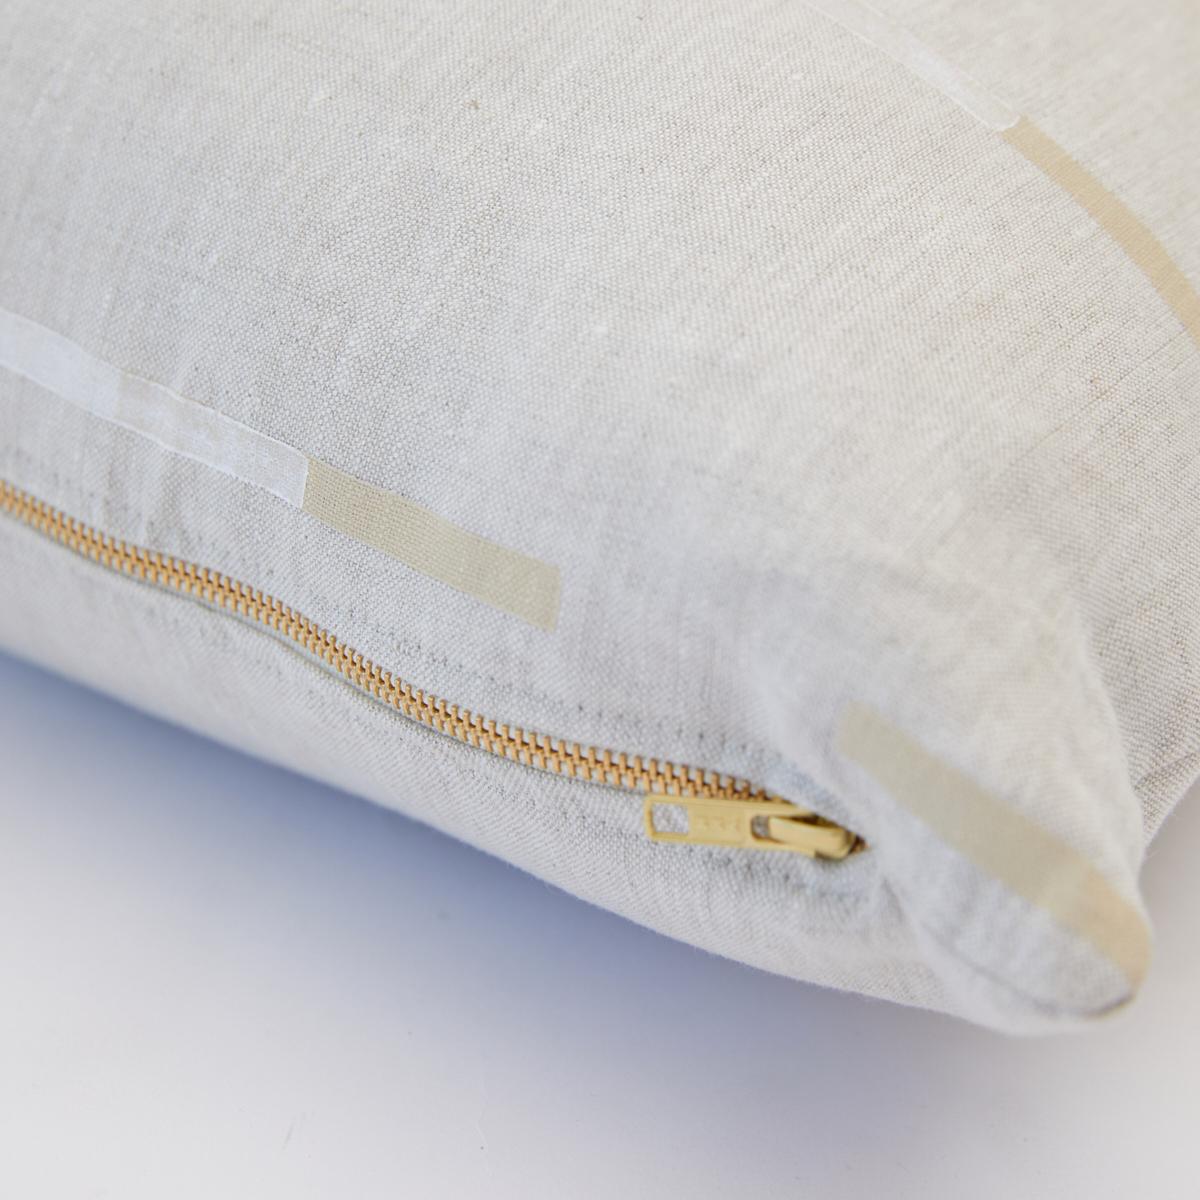 This pillow features Overlapping Dashes by Caroline Z Hurleywith a knife edge finish. Designed by Caroline Z Hurley in her Brooklyn studio and block-printed in New Bedford, Massachusetts. Each shape is cut and individually stamped onto the linen by